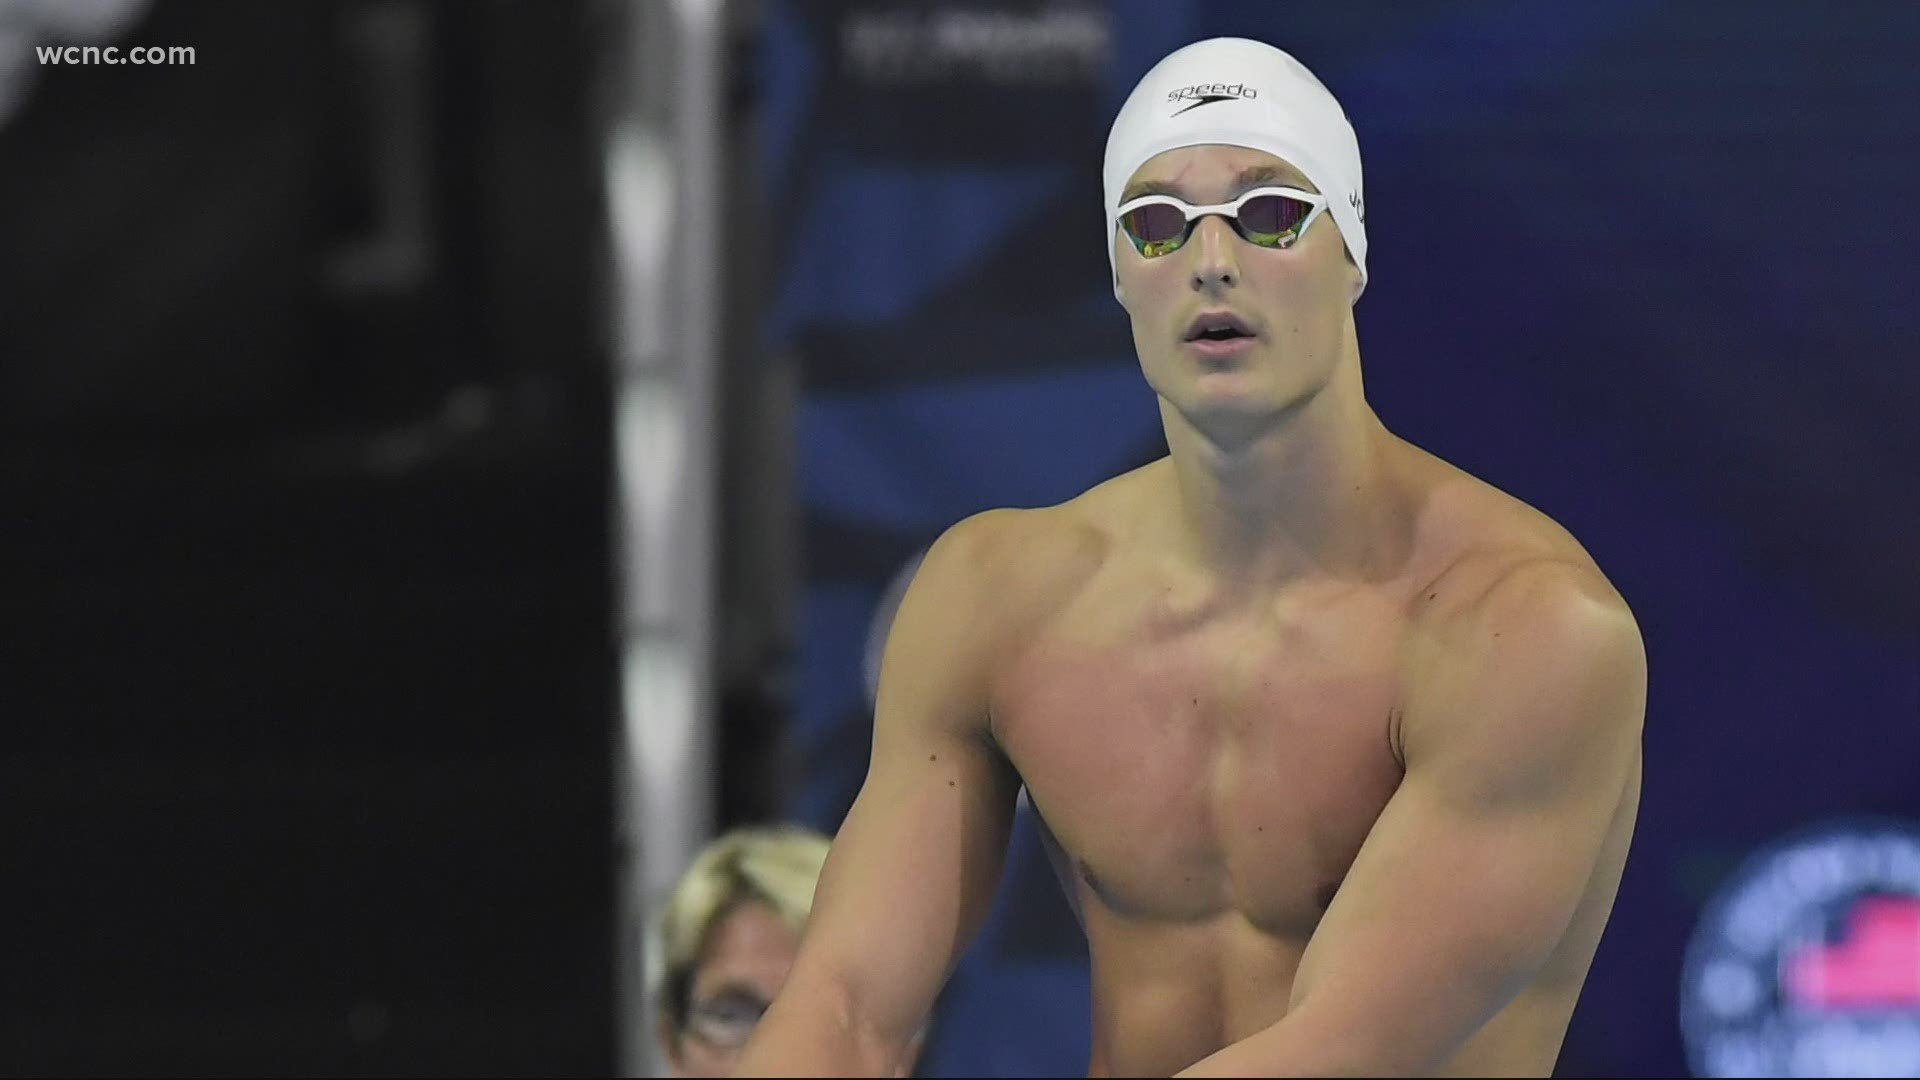 We talk with him about his training and how his love for swimming led to where he is today.